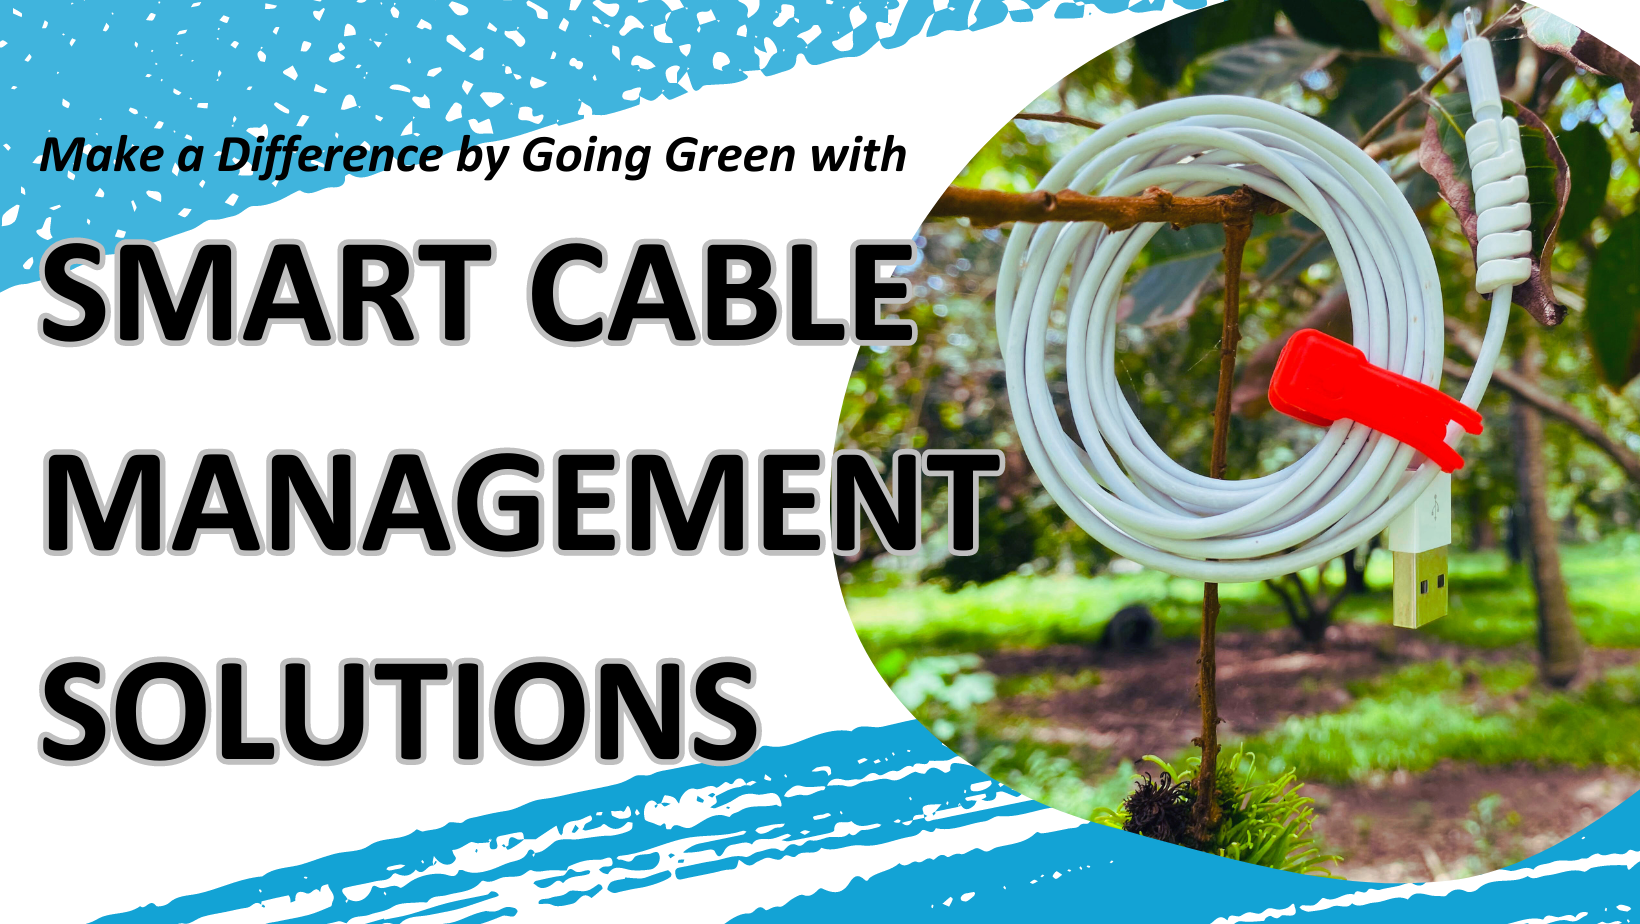 Make a Difference by Going Green with Smart Cable Management Solutions